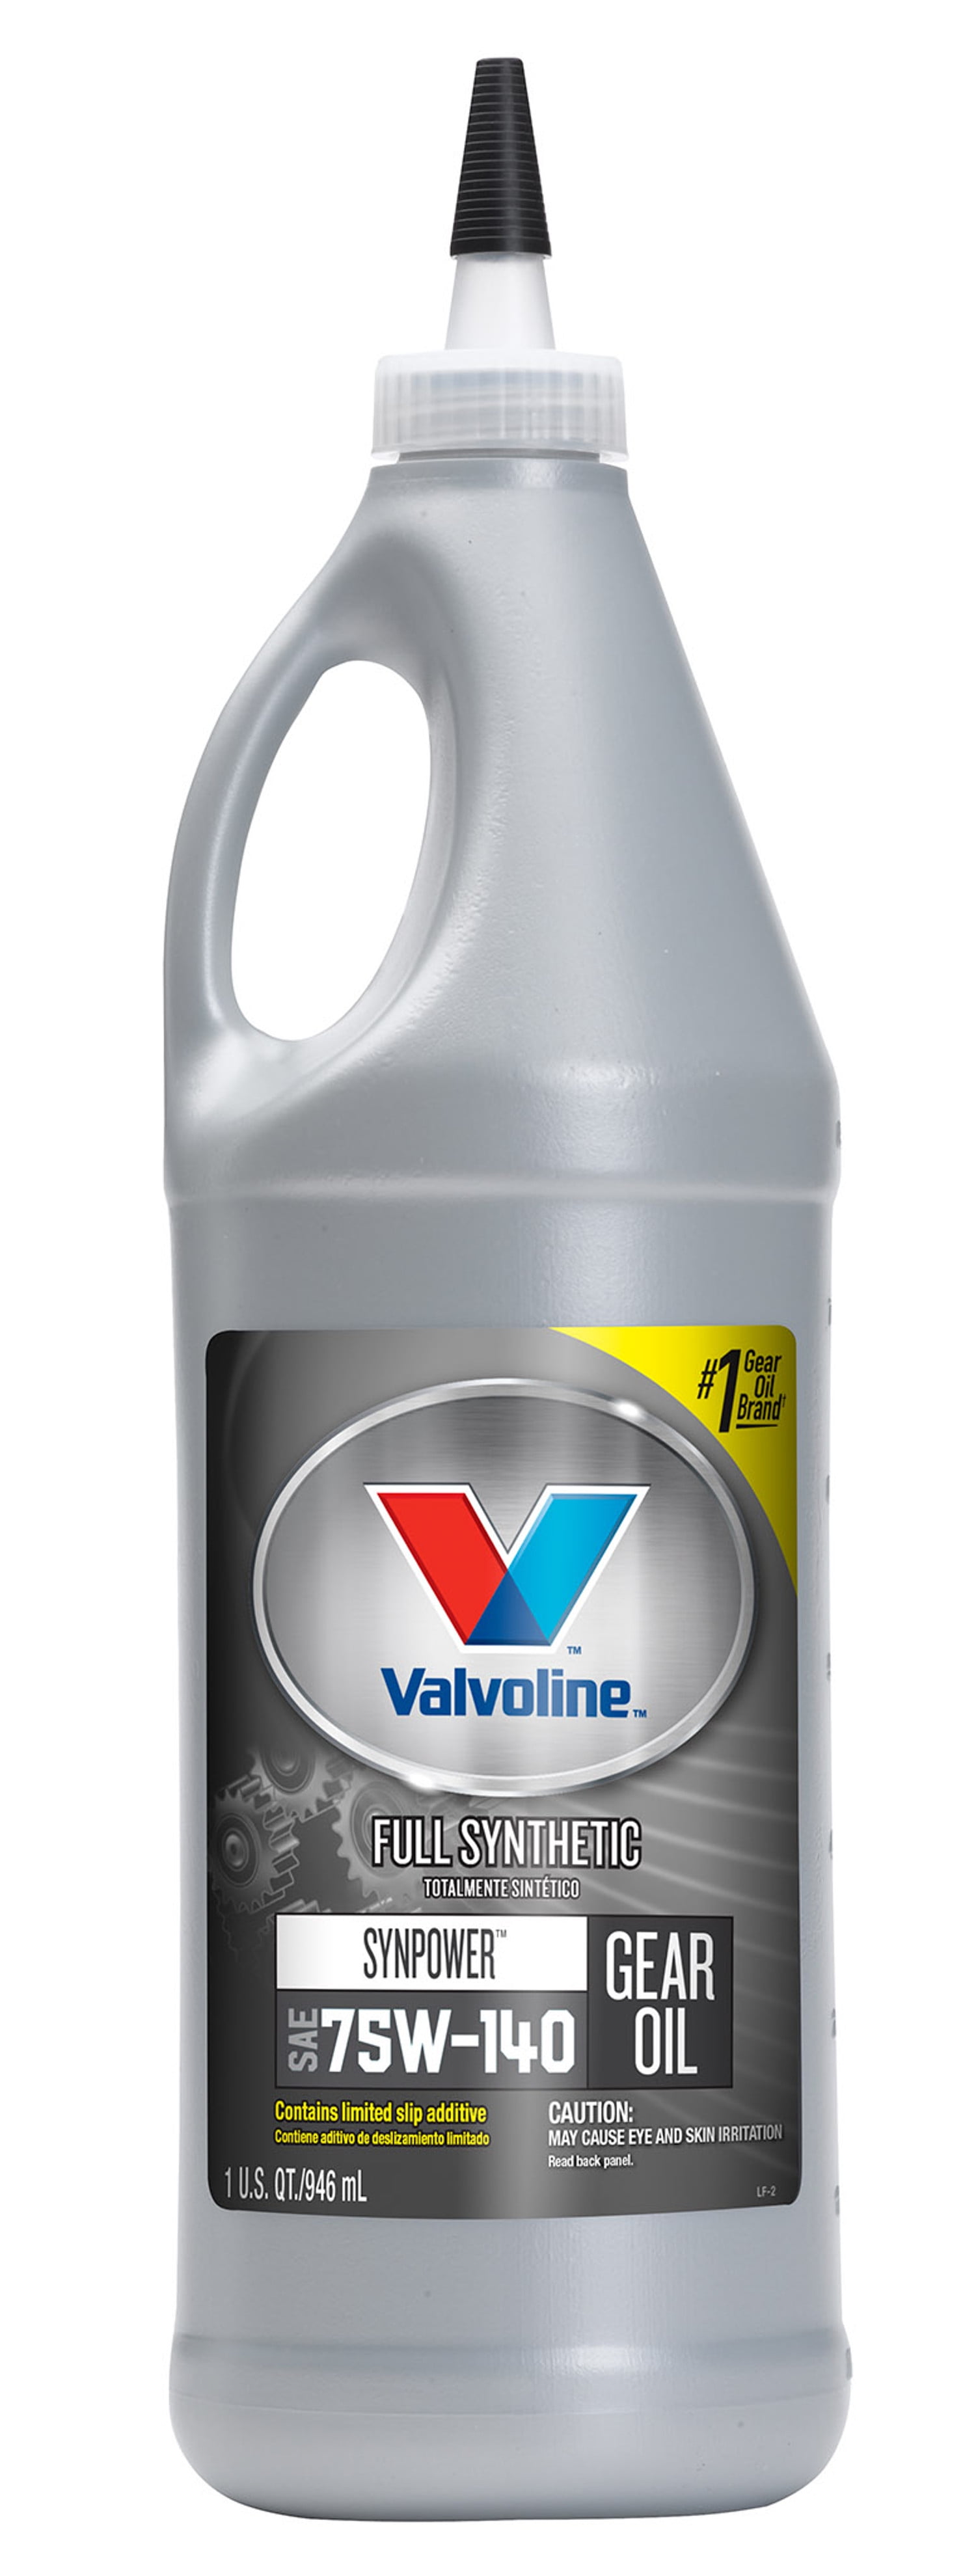 Valvoline SynPower SAE 75W-140 Full Synthetic Gear Oil 1 QT - Walmart.com - Walmart.com How To Get Gear Oil Out Of Clothes